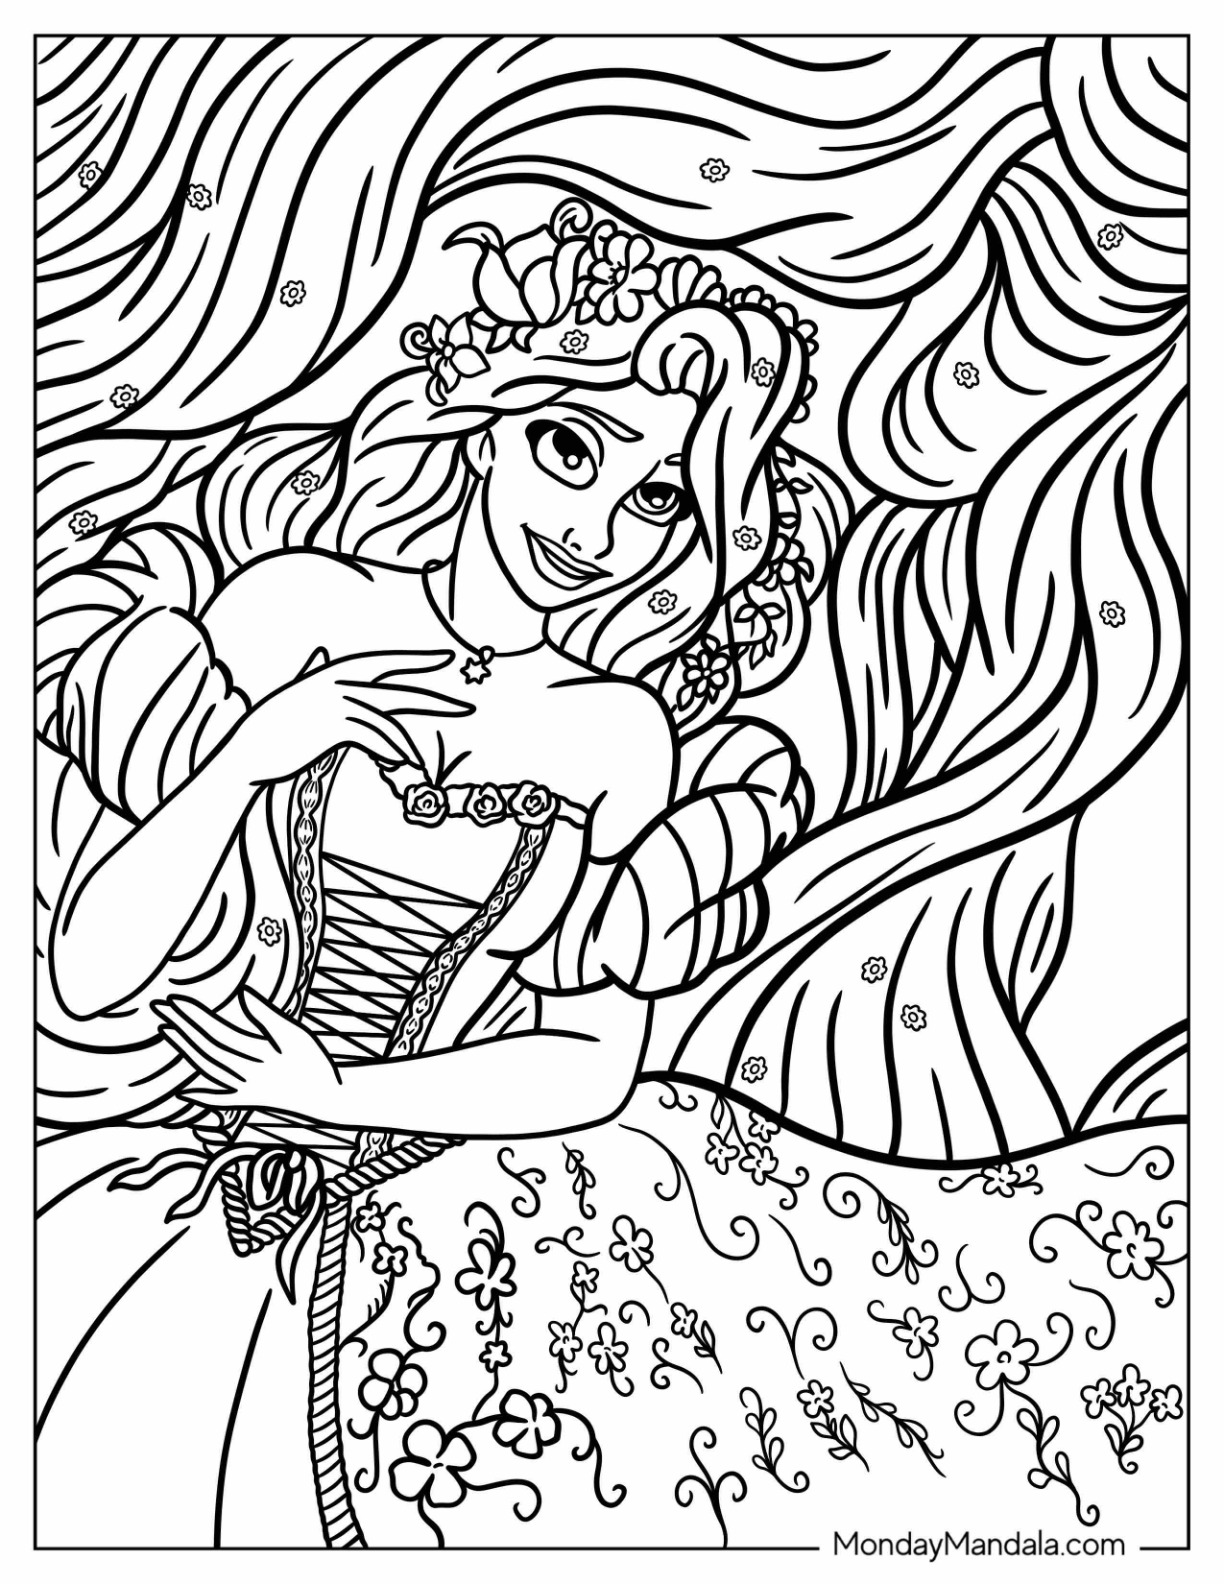 Disney coloring pages for adults free pdf printables